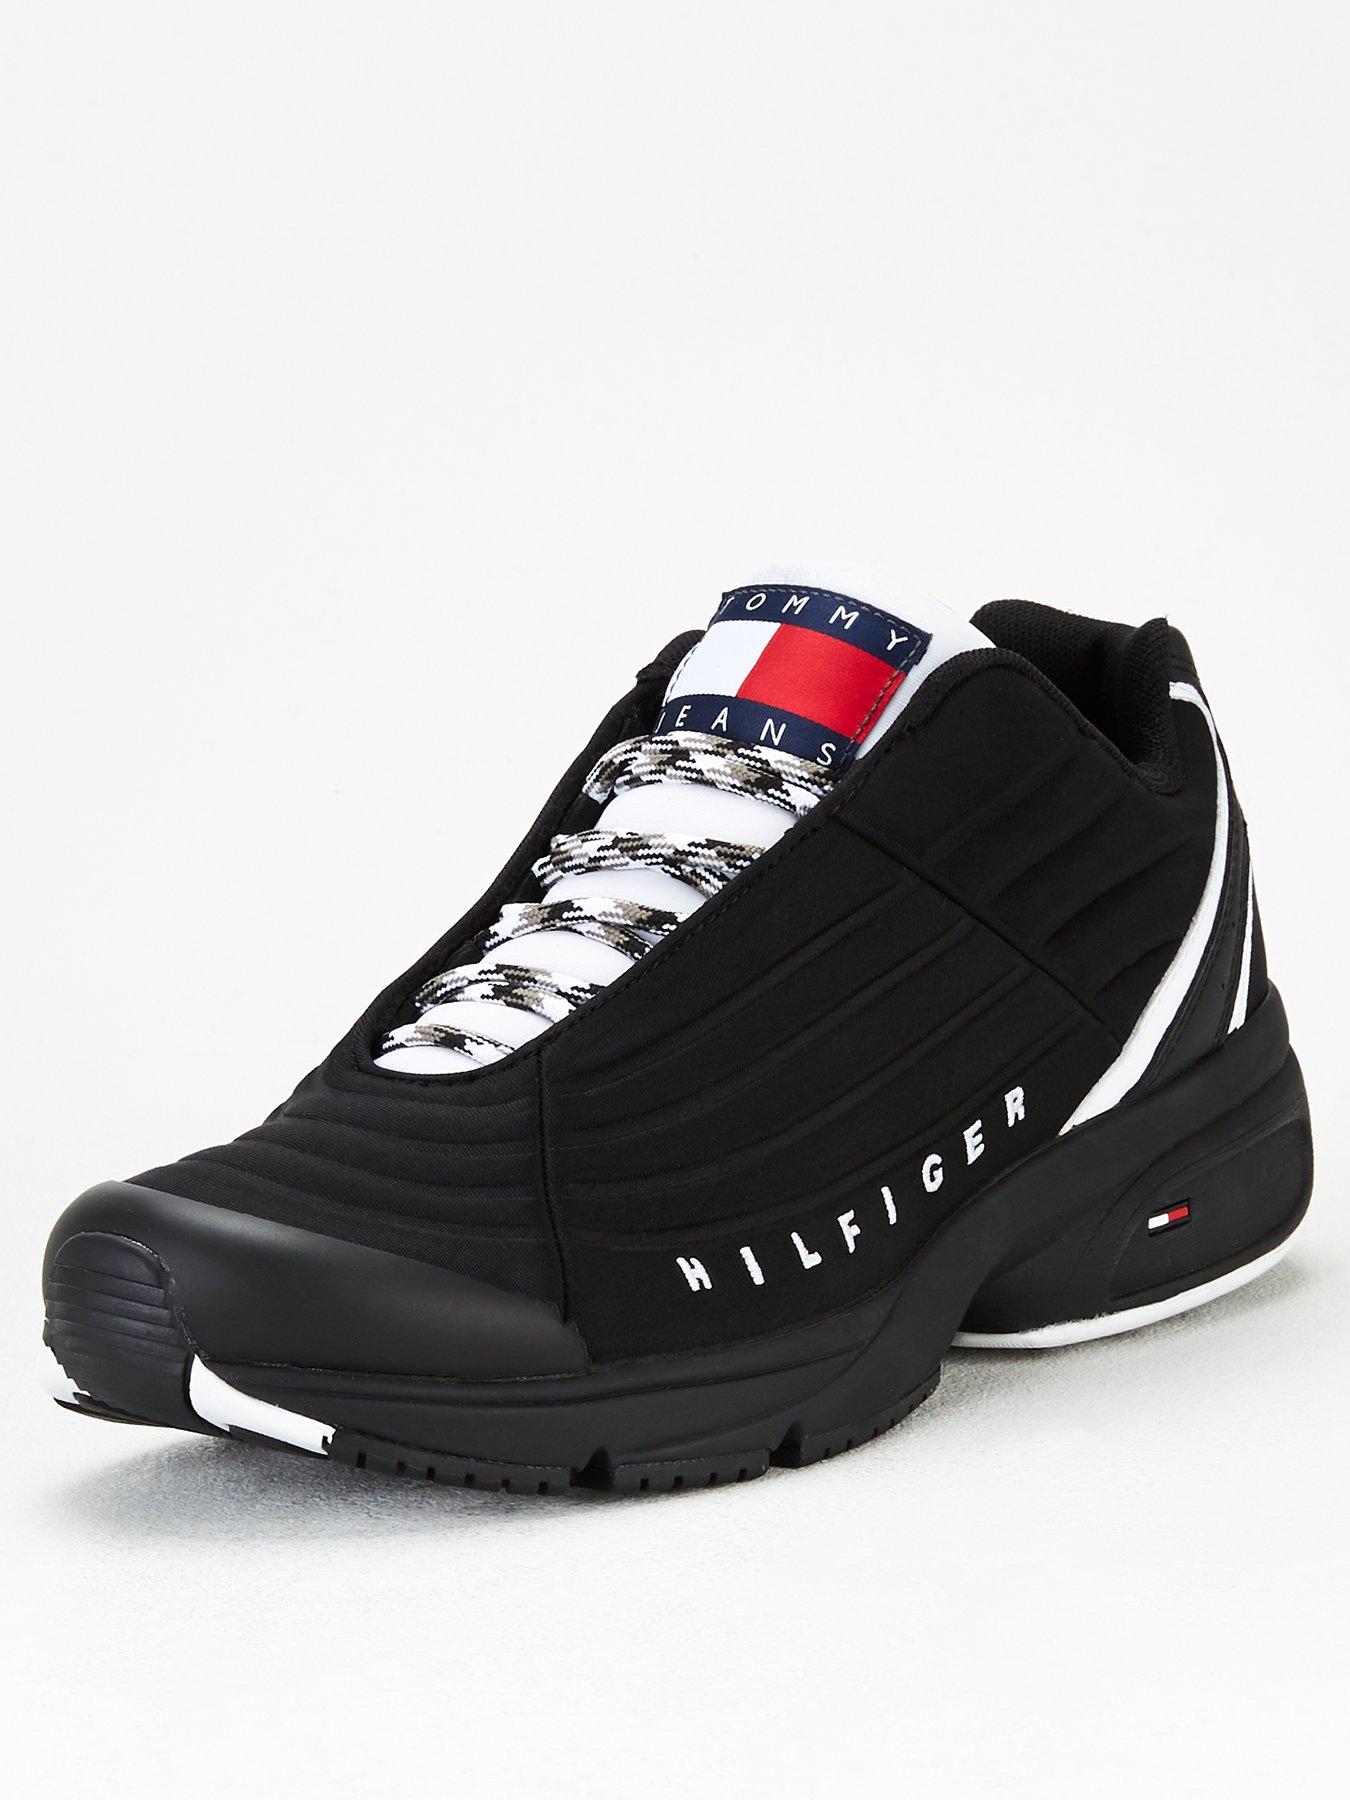 tommy hilfiger mens trainers uk